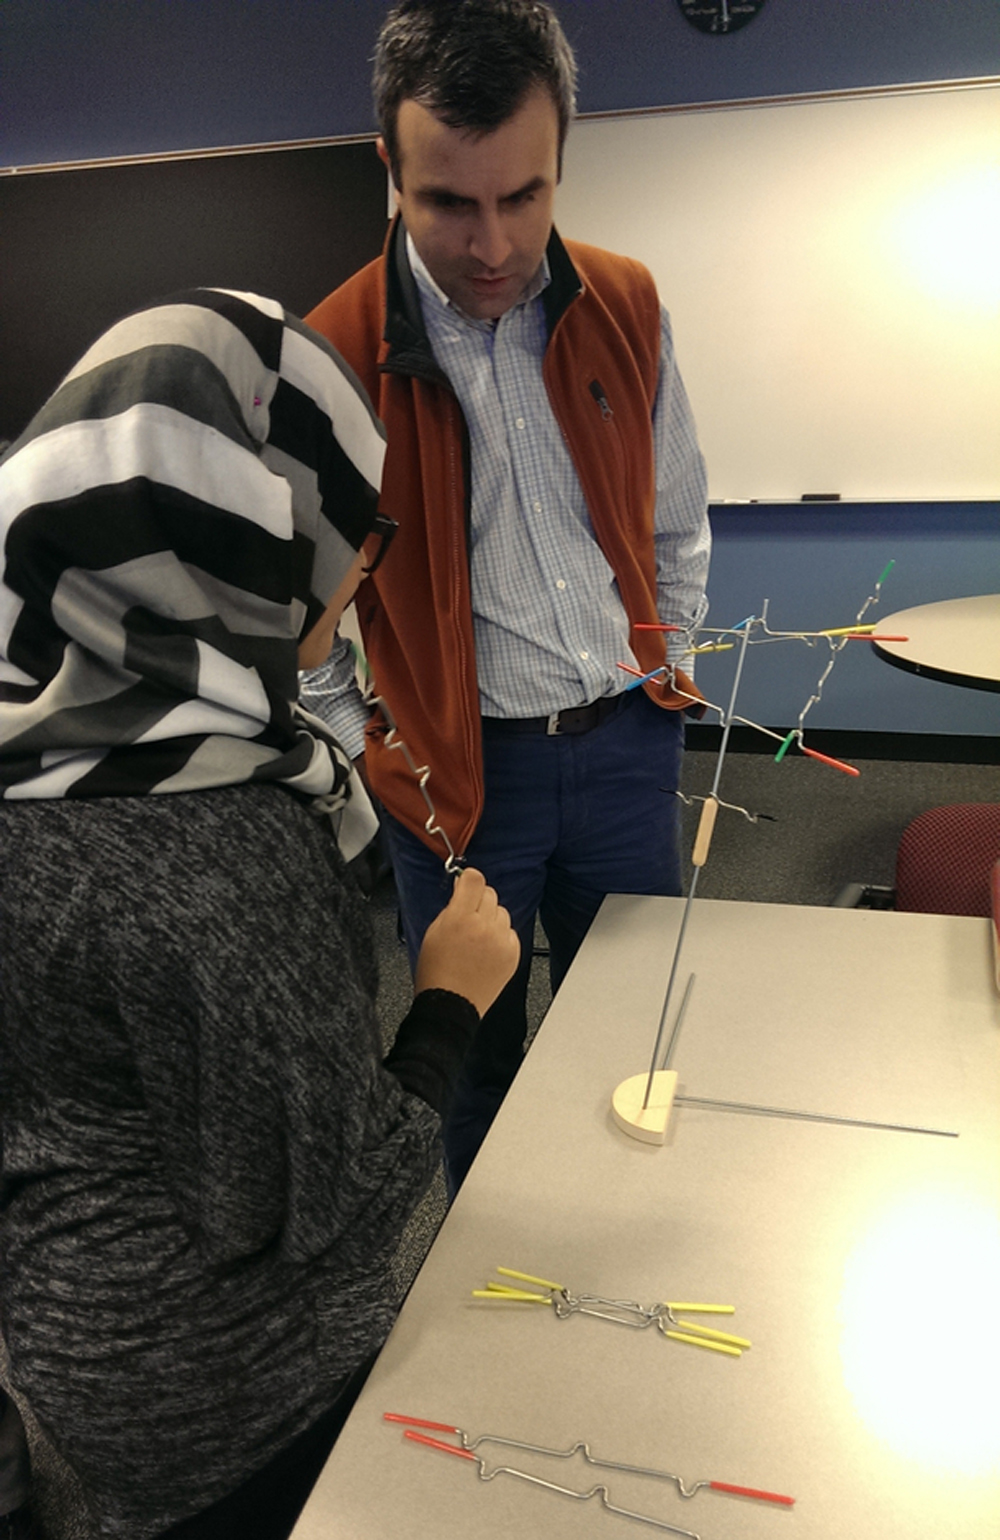 Instructor watching woman in hijab build a structure as part of Math Circles program